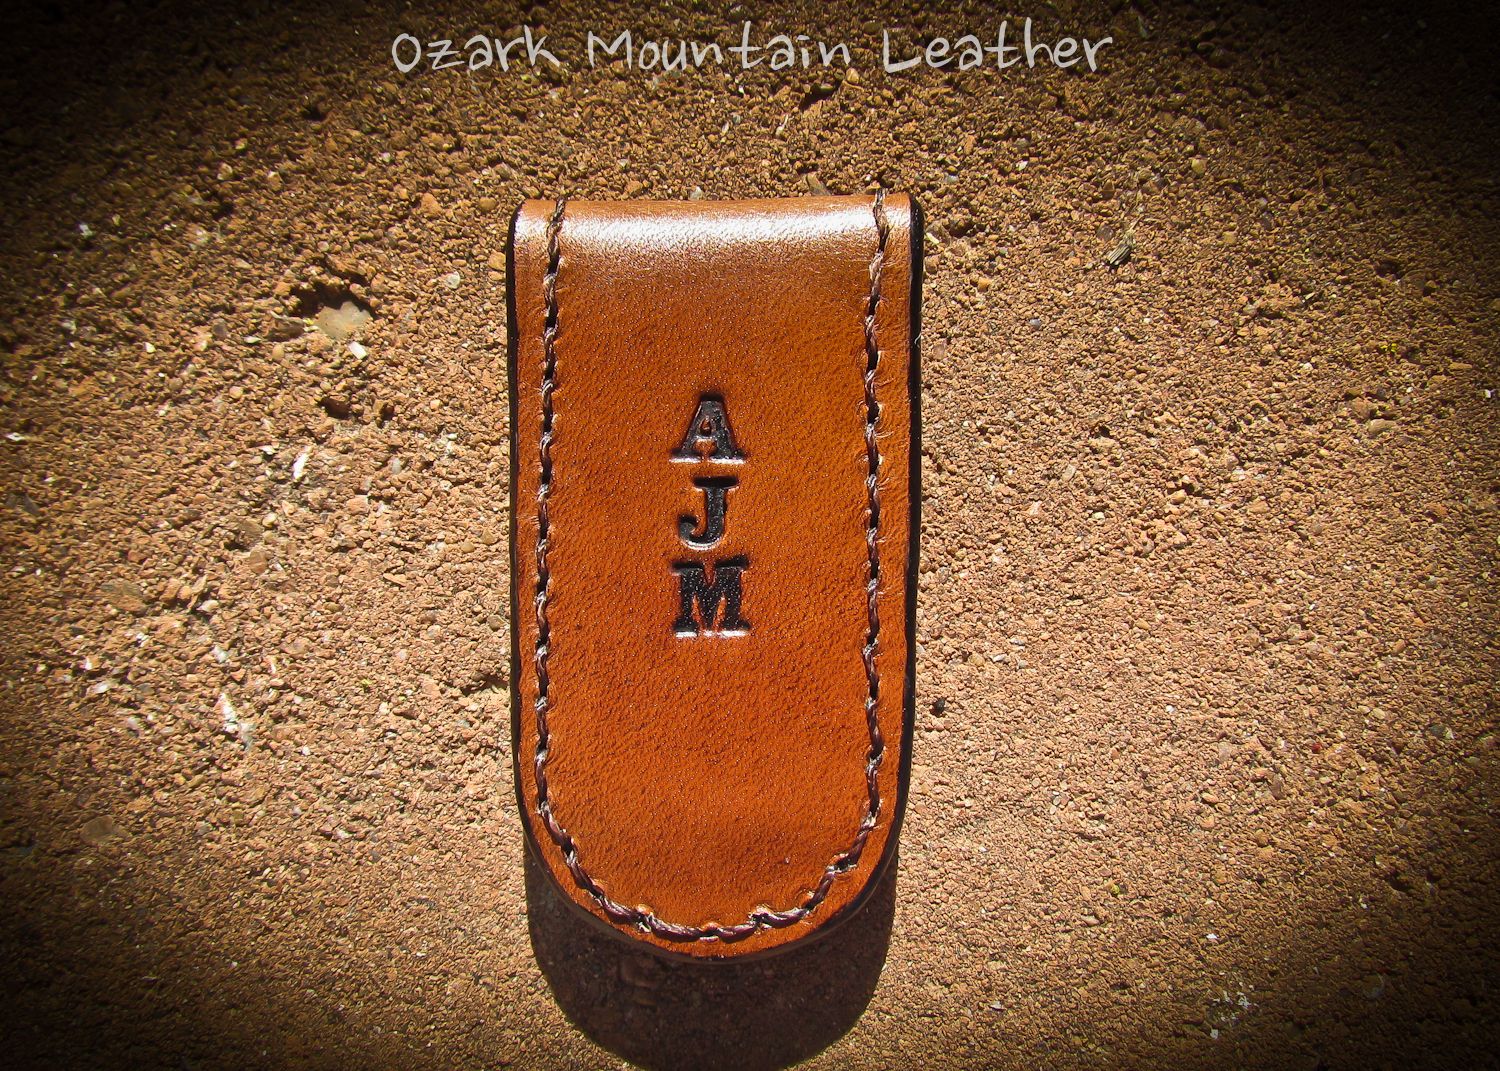 Personalized Studded Leather Money Clip and Card Holder